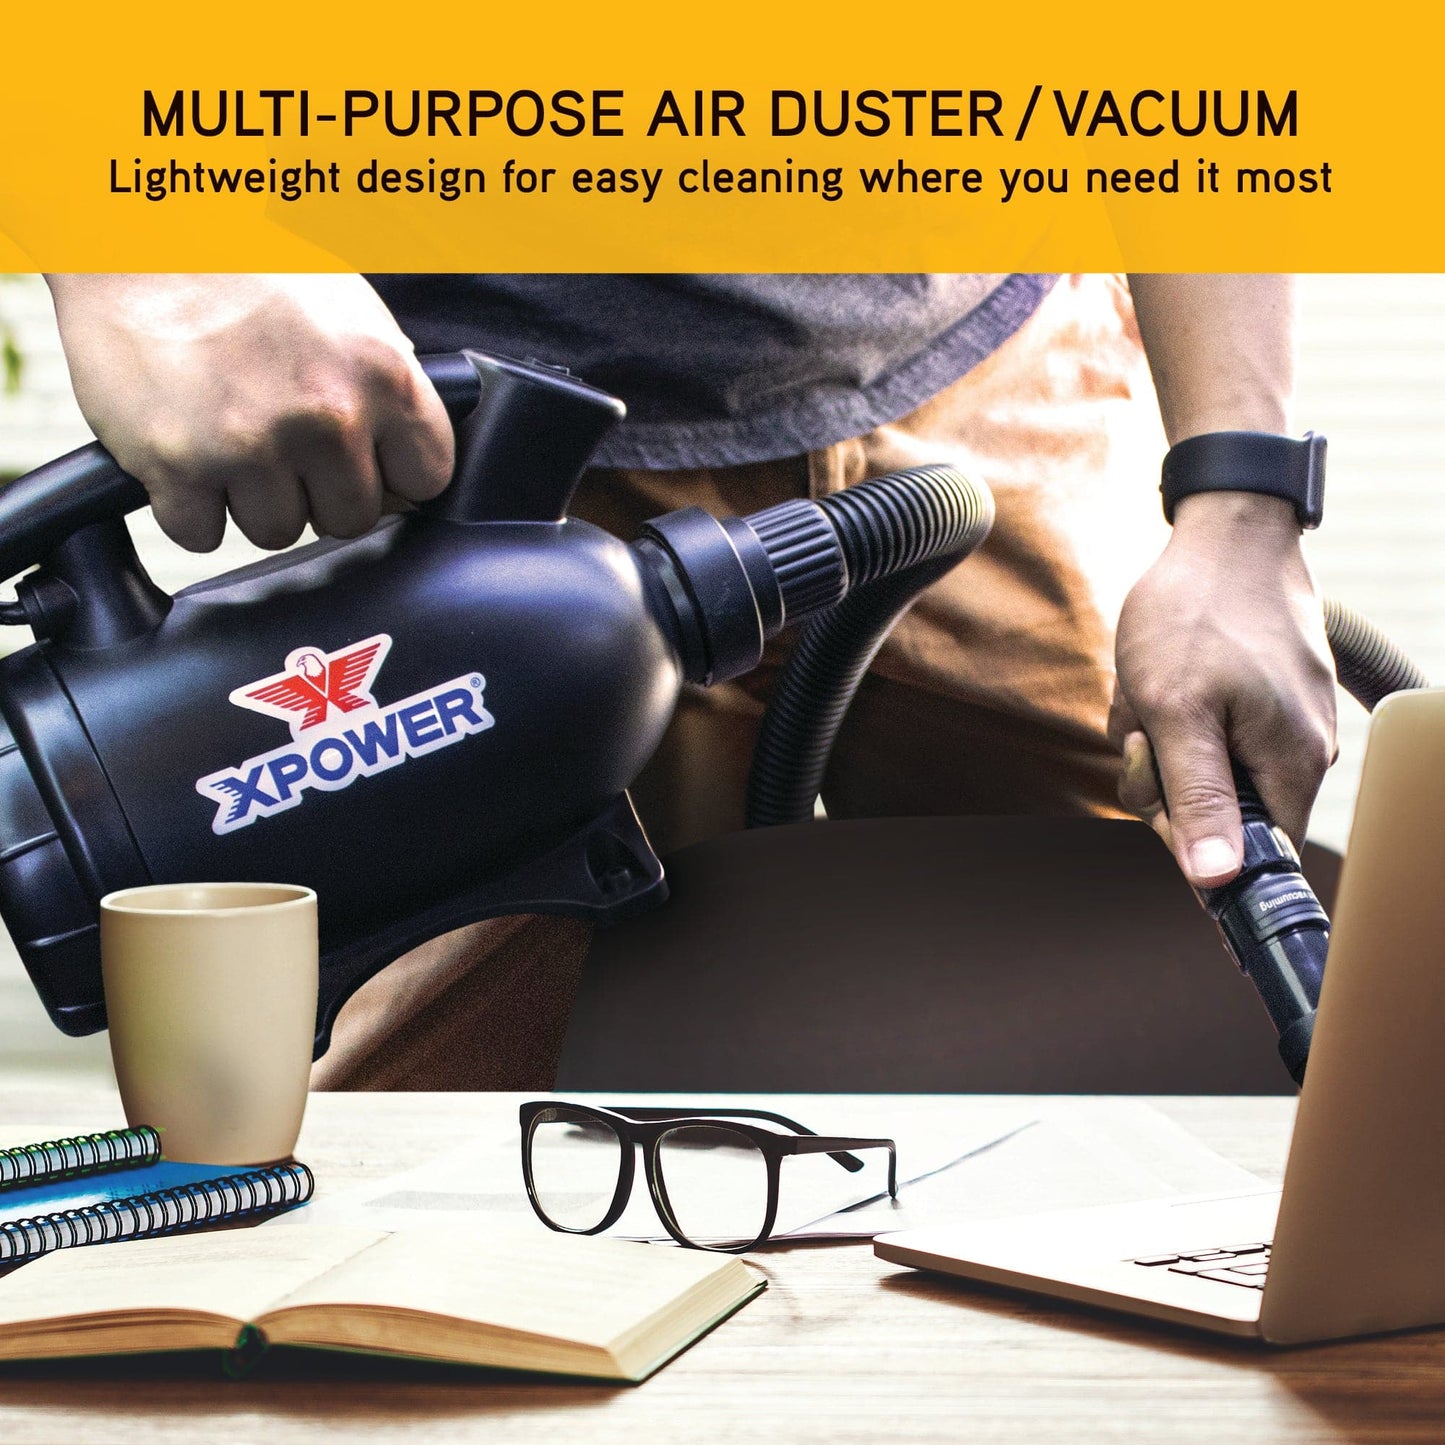 XPOWER A-5 Multi-Use Powered Air Duster, Dryer, Pump, Blower